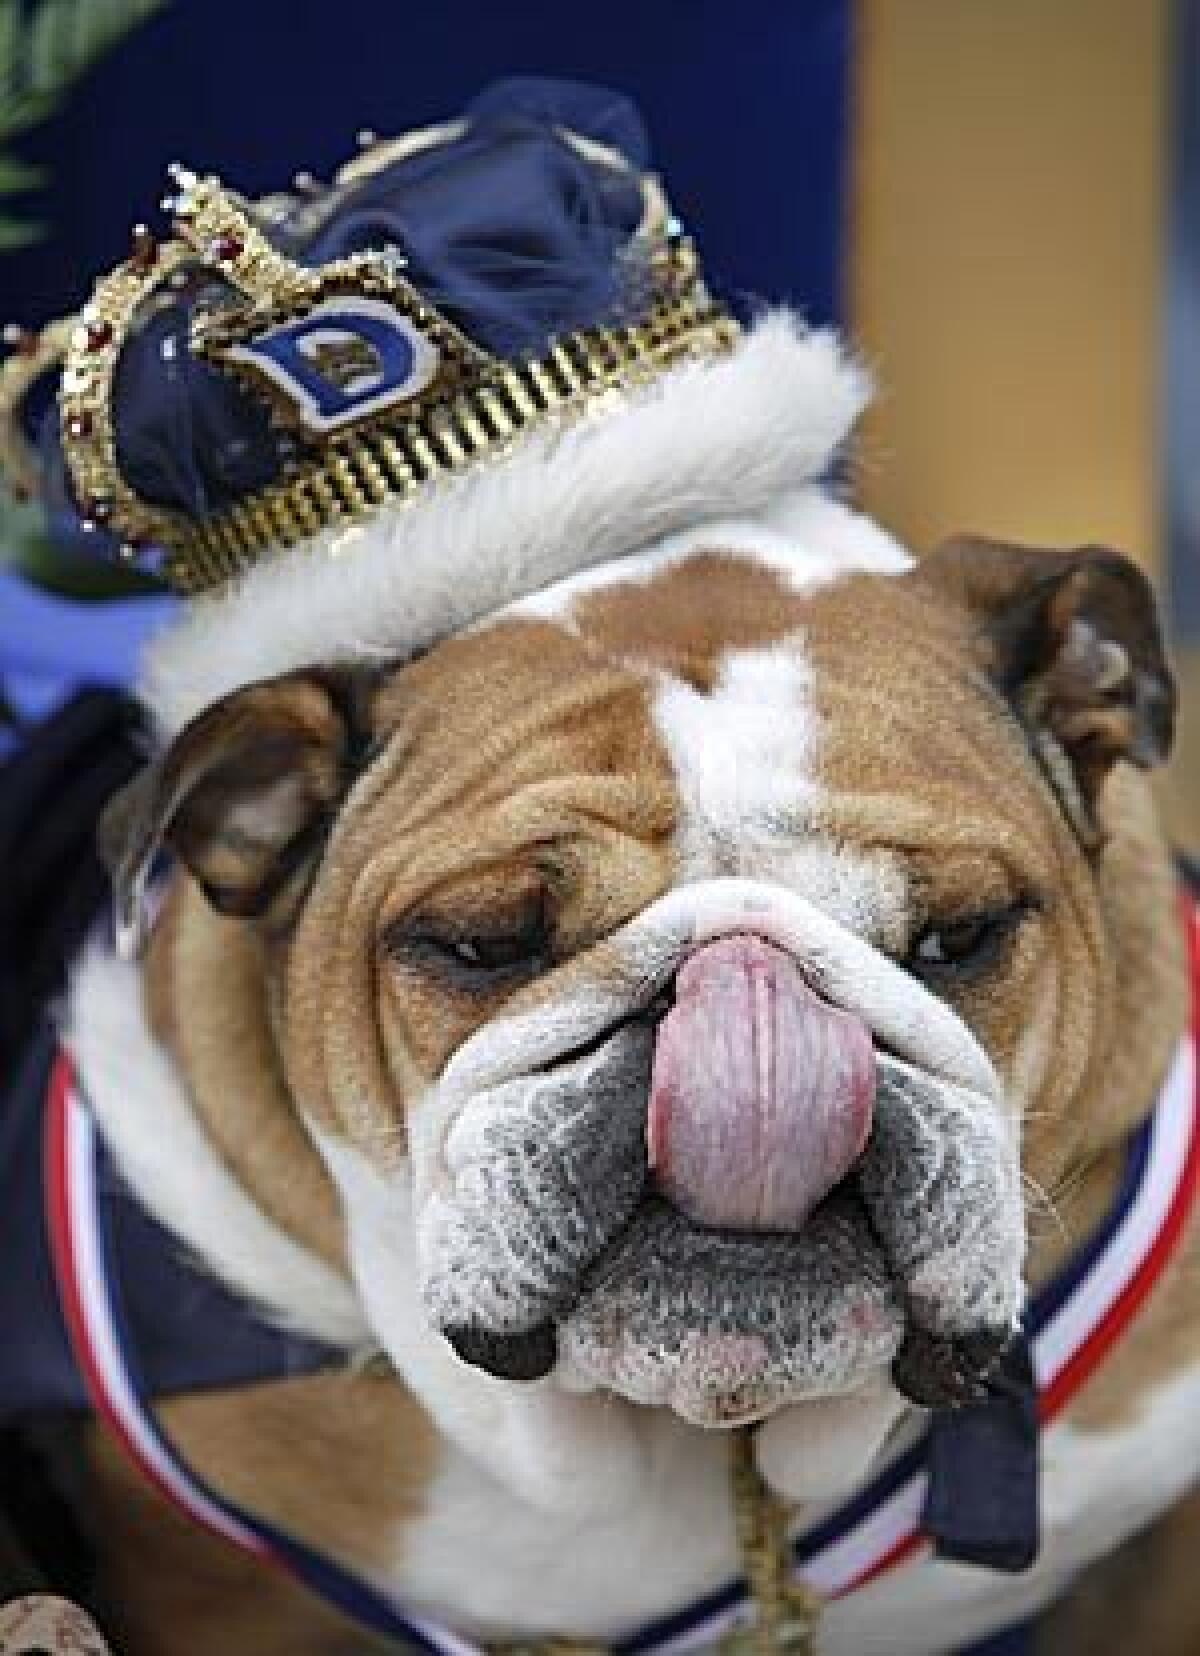 Porterhouse sits on the throne after being crowned the winner of the 30th Drake Relays Beautiful Bulldog Contest, Monday, April 20, 2009, in Des Moines, Iowa.